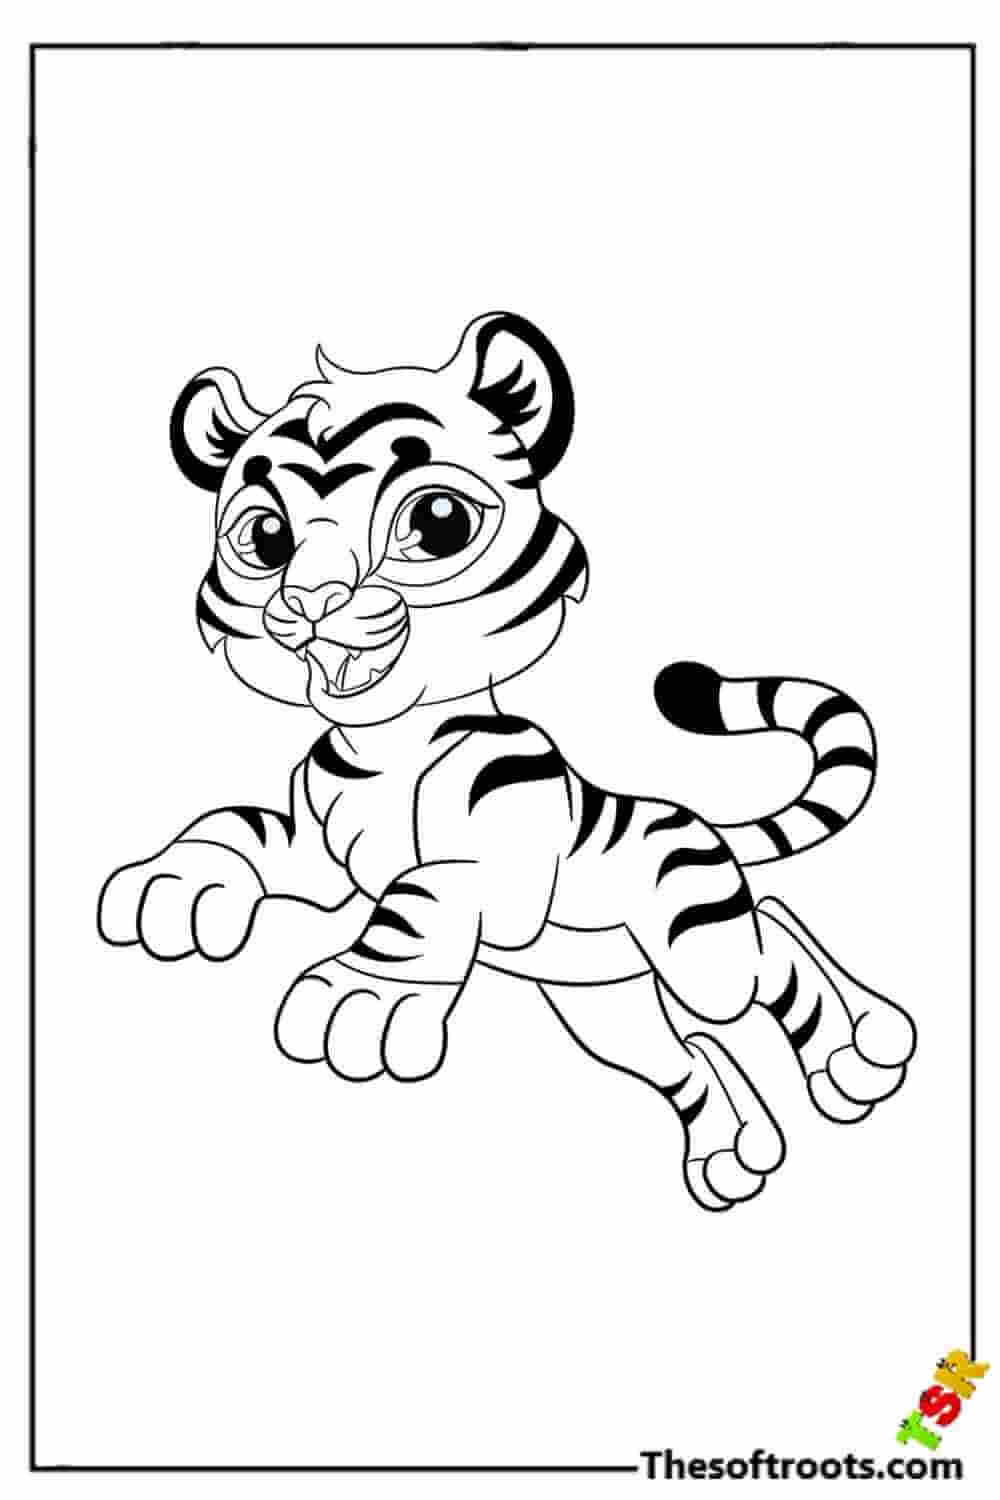 Jumping Tiger coloring pages